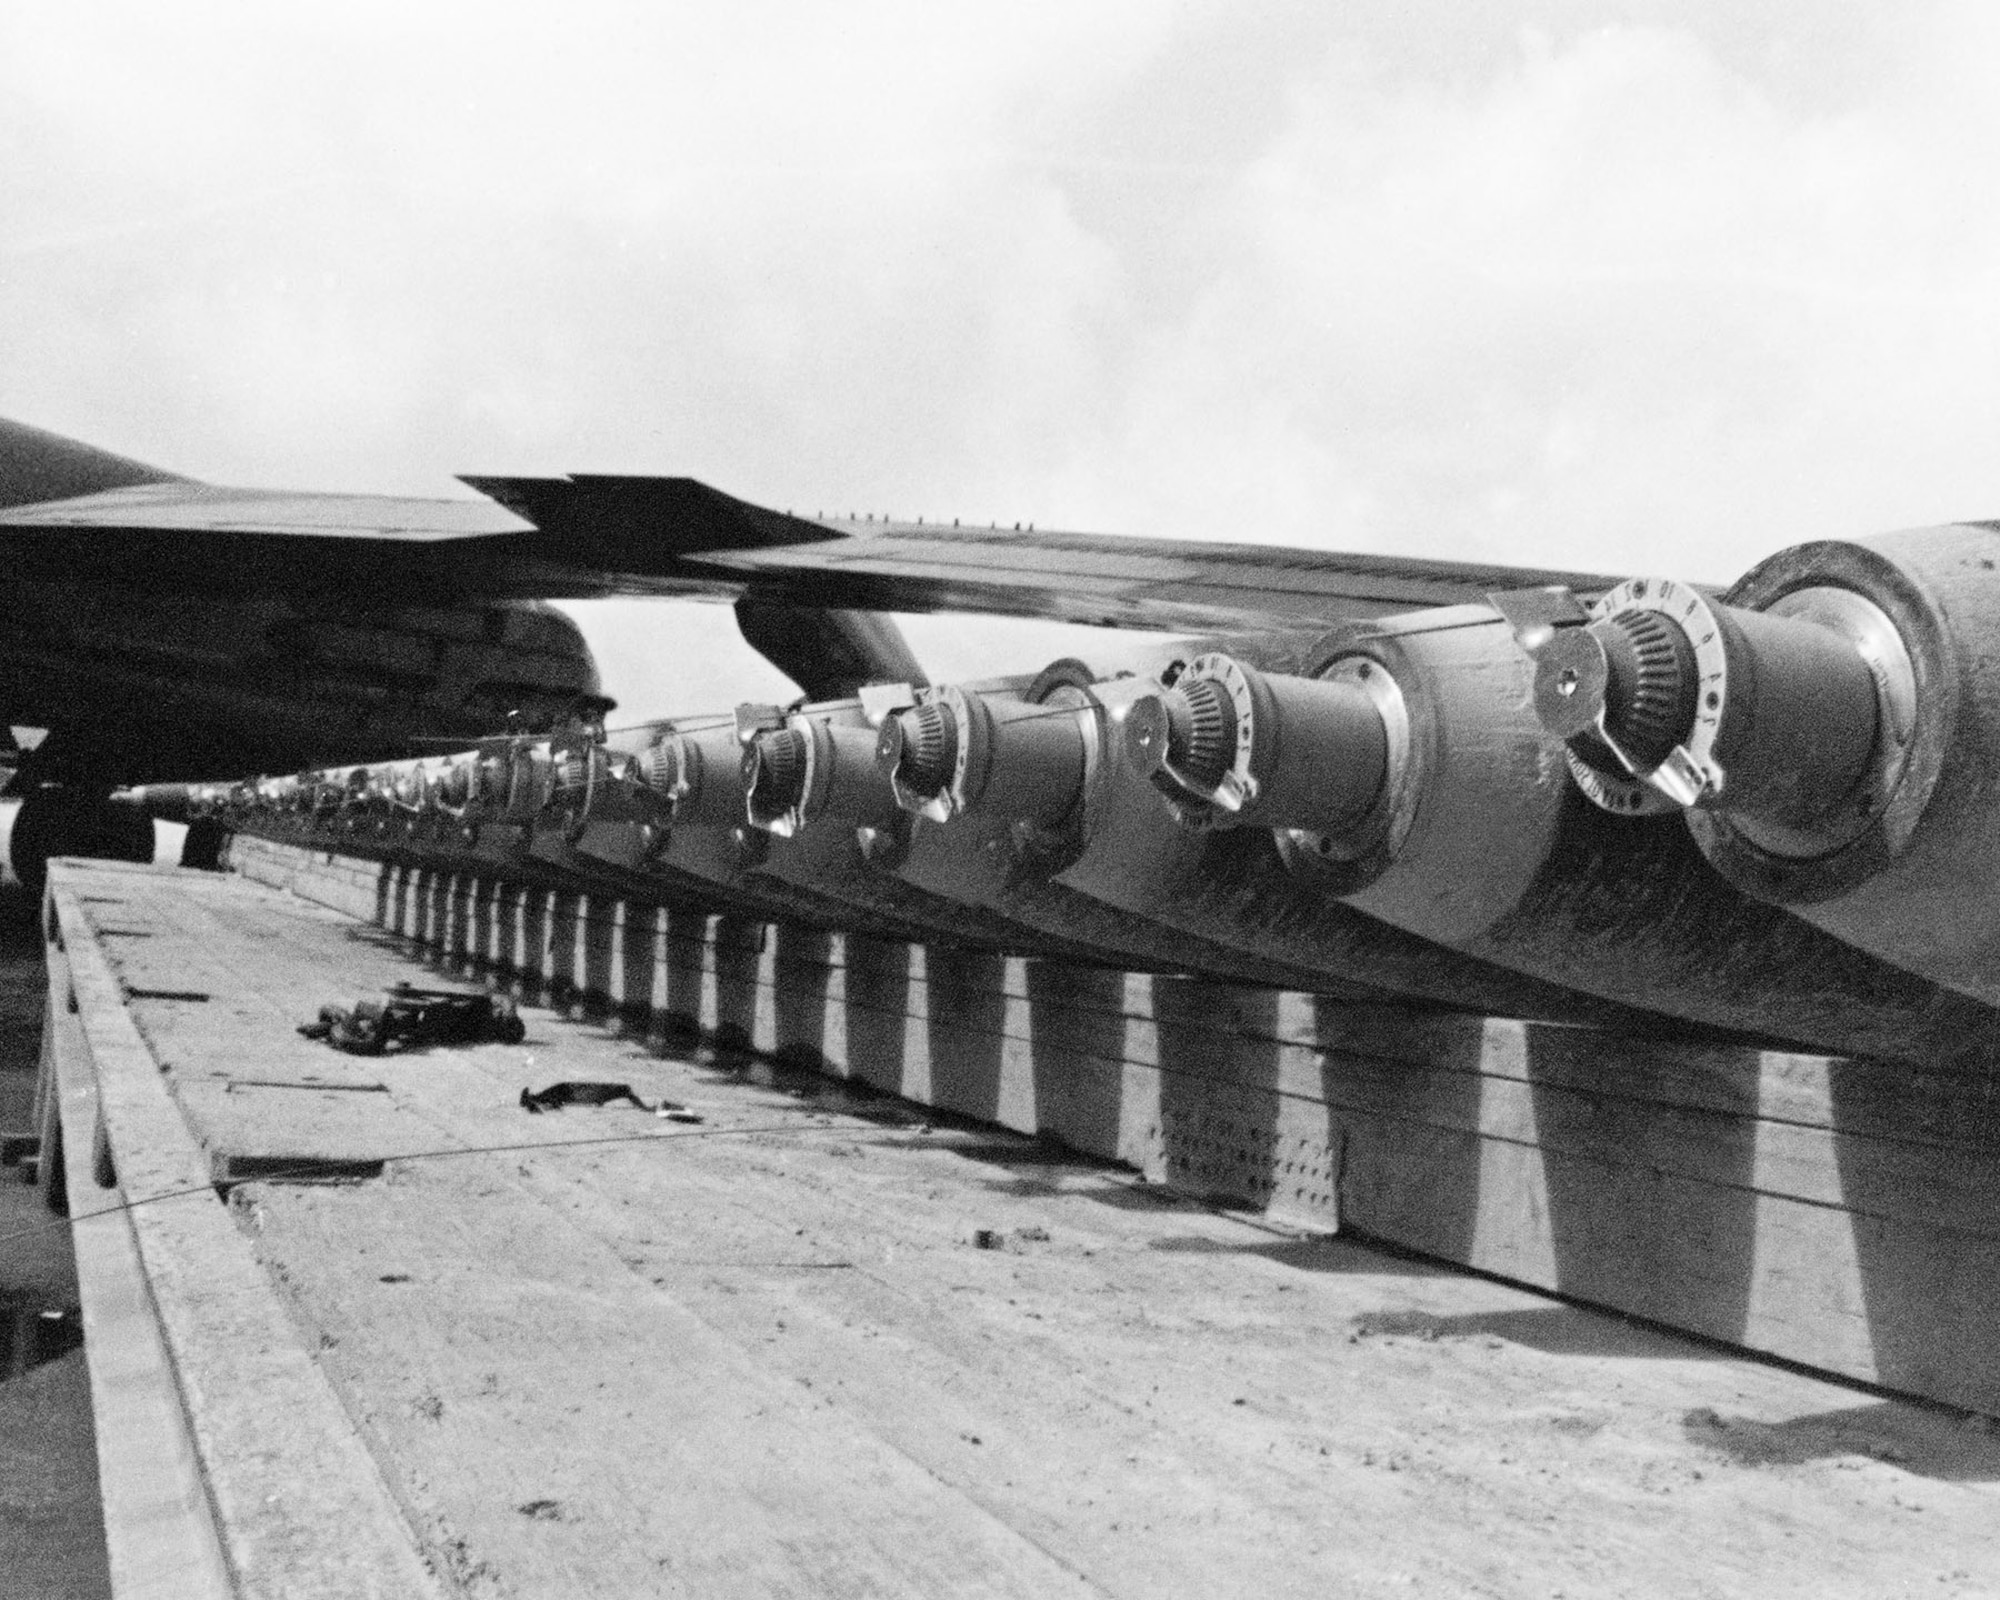 With their shipping plugs replaced by fuses, these bombs are ready to load onto a B-52 at Andersen AFB, Guam, for Operation Linebacker II. (U.S. Air Force photo)